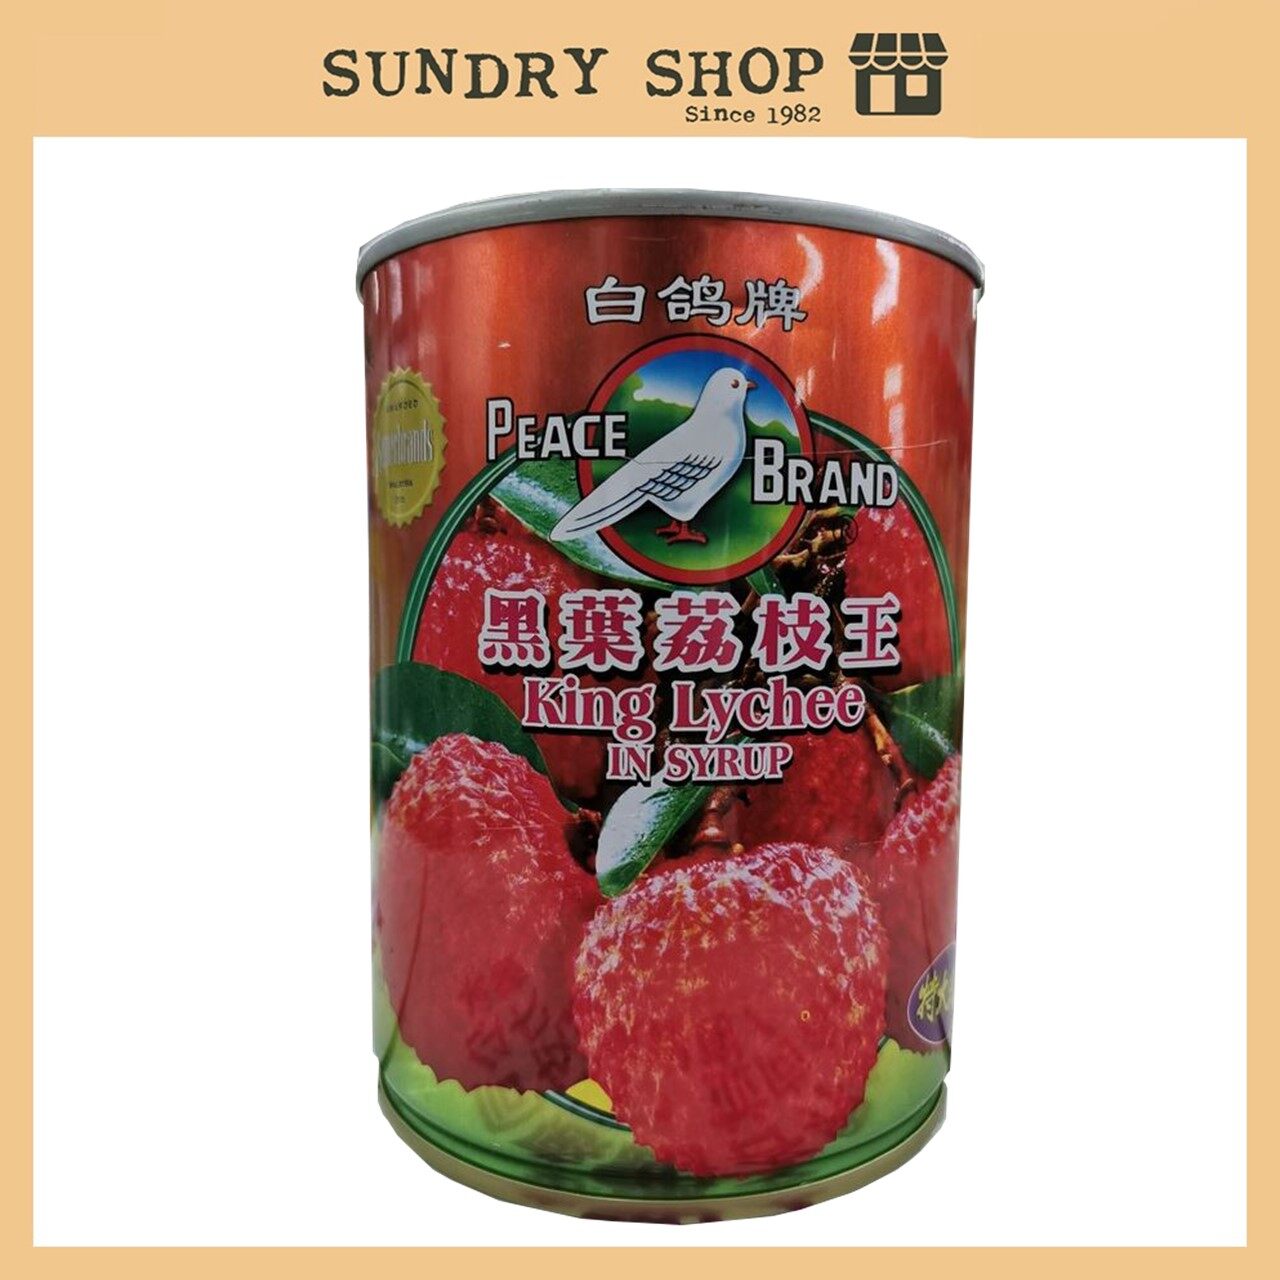 PEACE BRAND KING LYCHEE IN SYRUP LAI CI (extra large) 565g